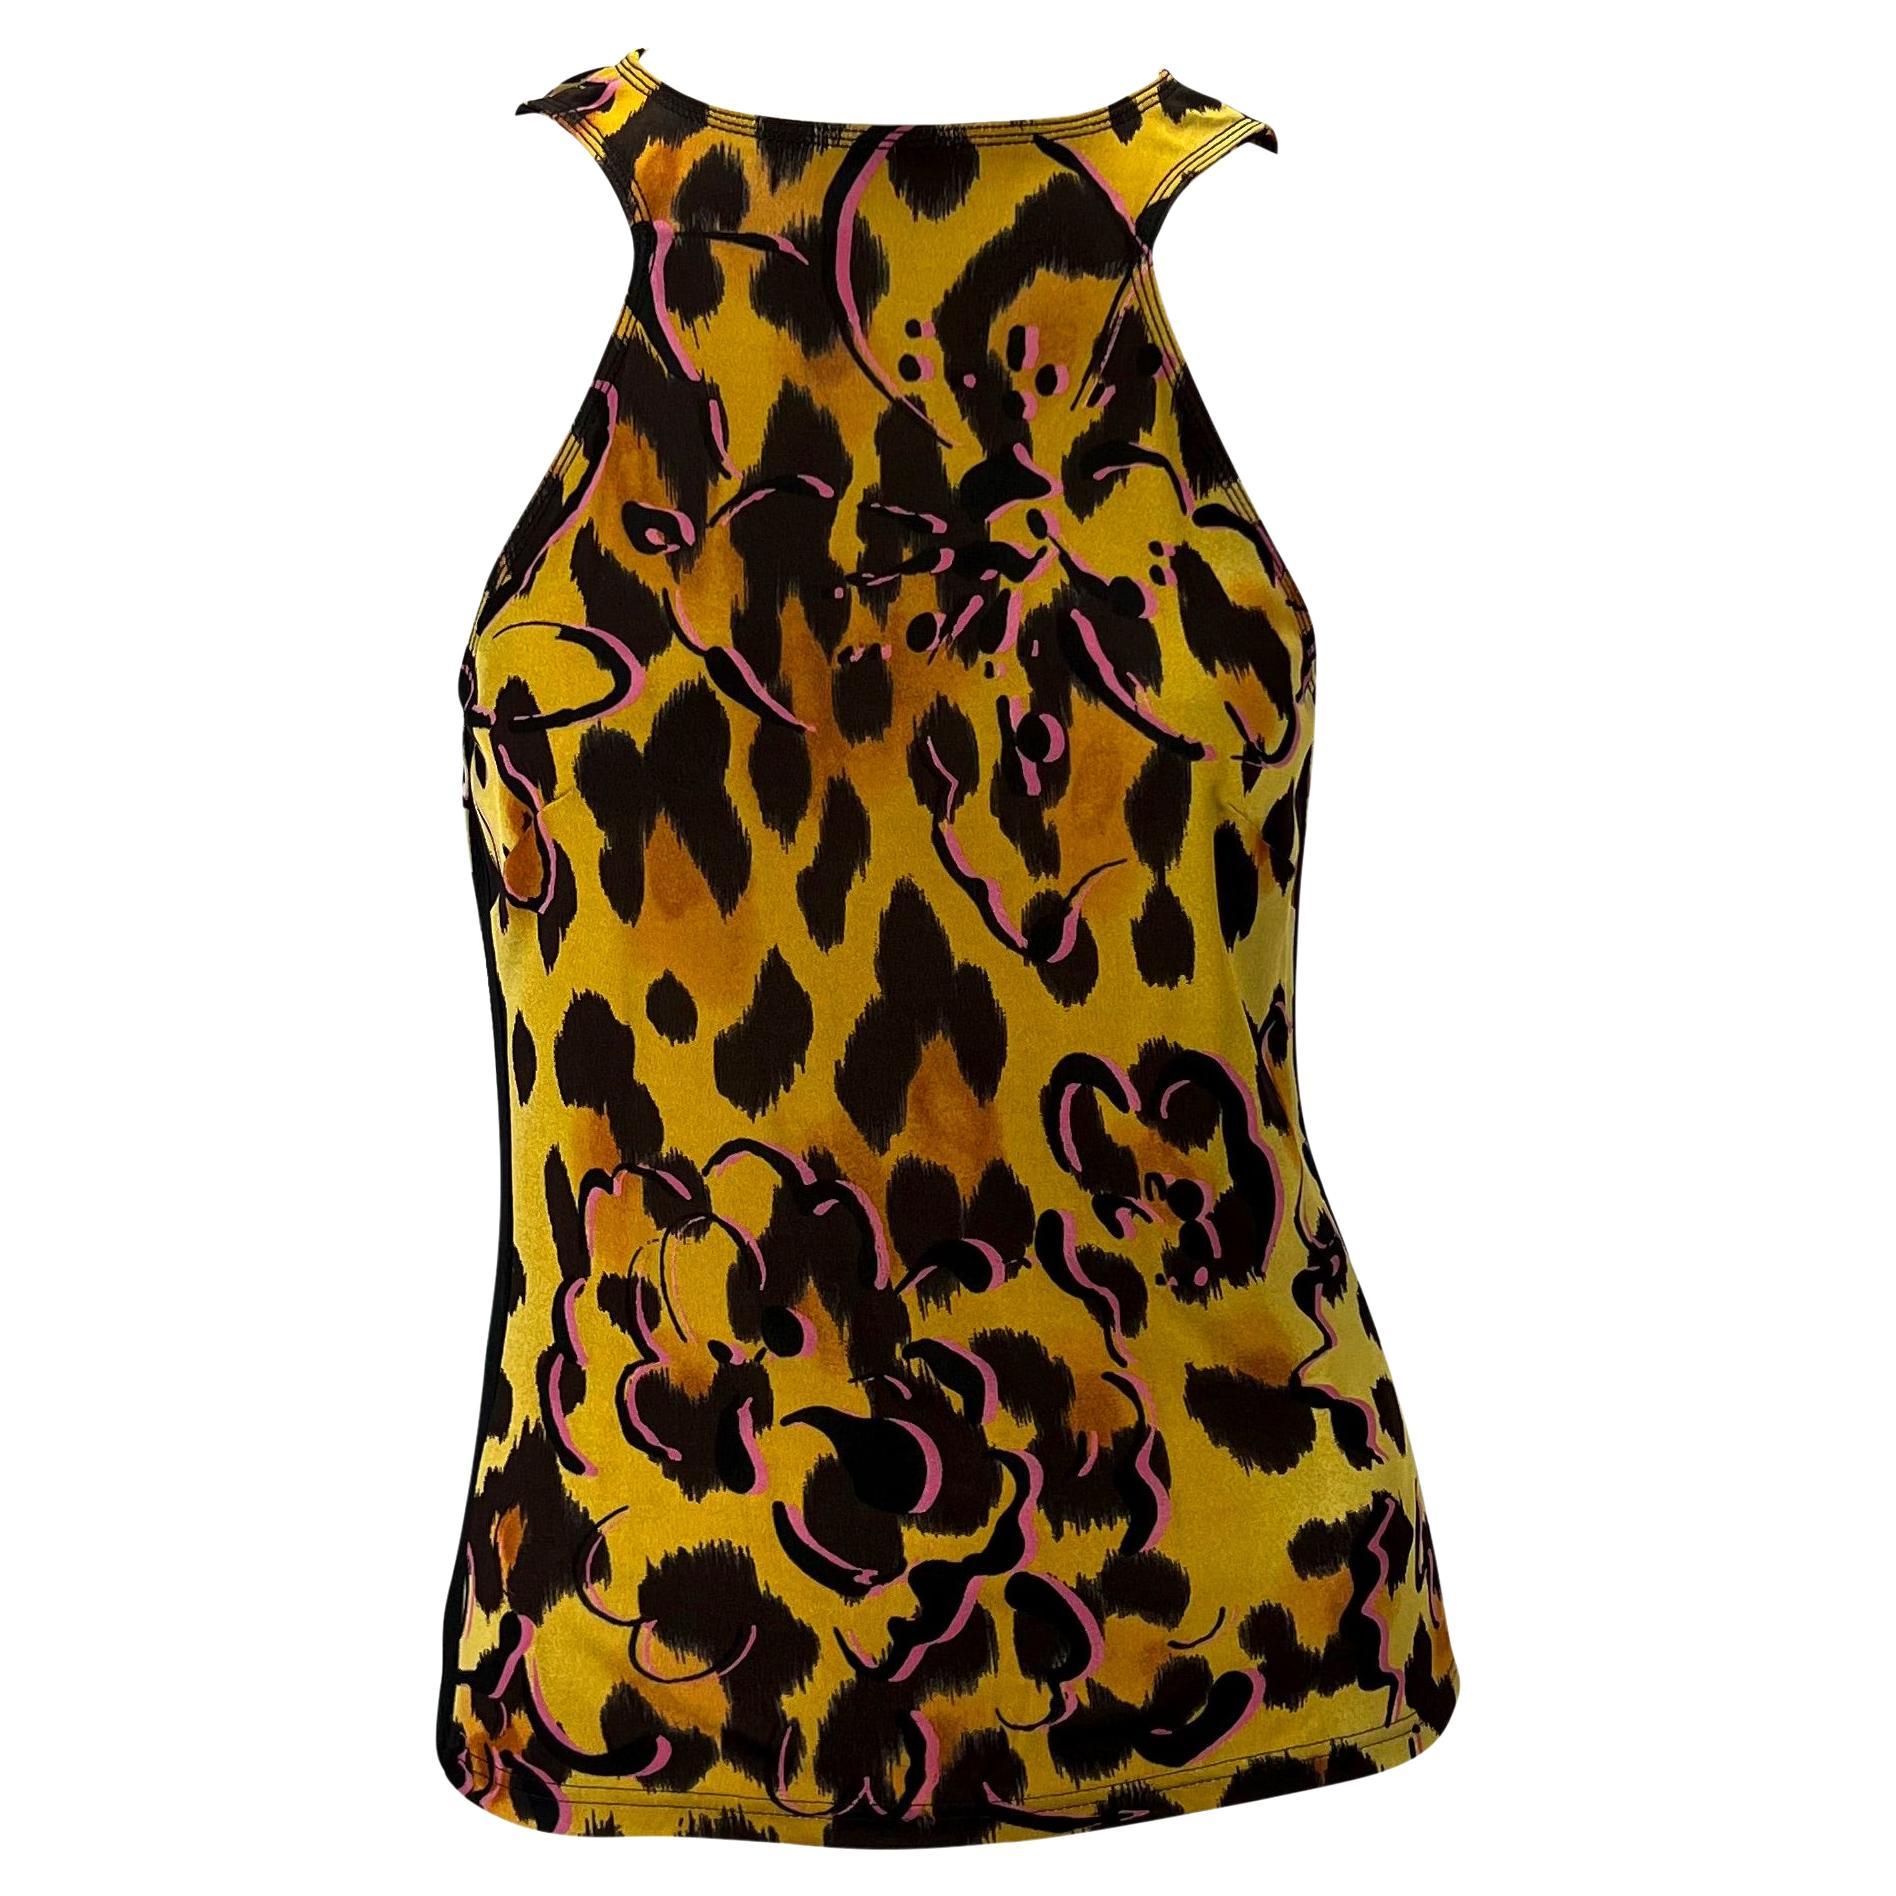 NWT S/S 2002 Gianni Versace by Donatella Animal Print Mesh Tank Top For Sale